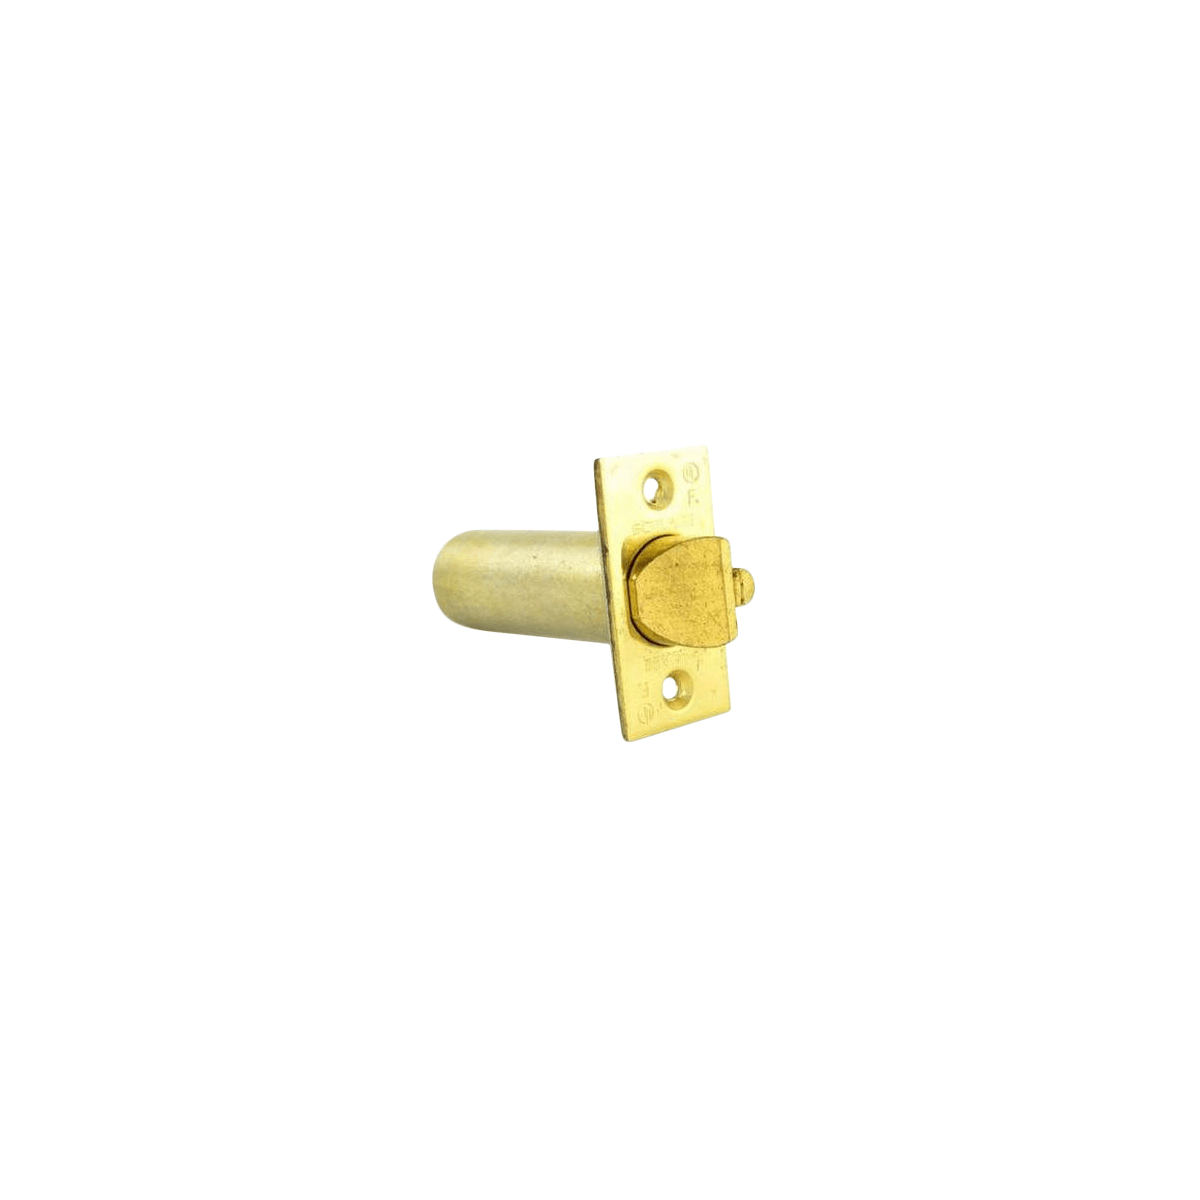 Schlage 16-203 2 3/8 or 2 3/4 Replacement Deadlatch with Square Corner 1 x 2 - Polished Brass